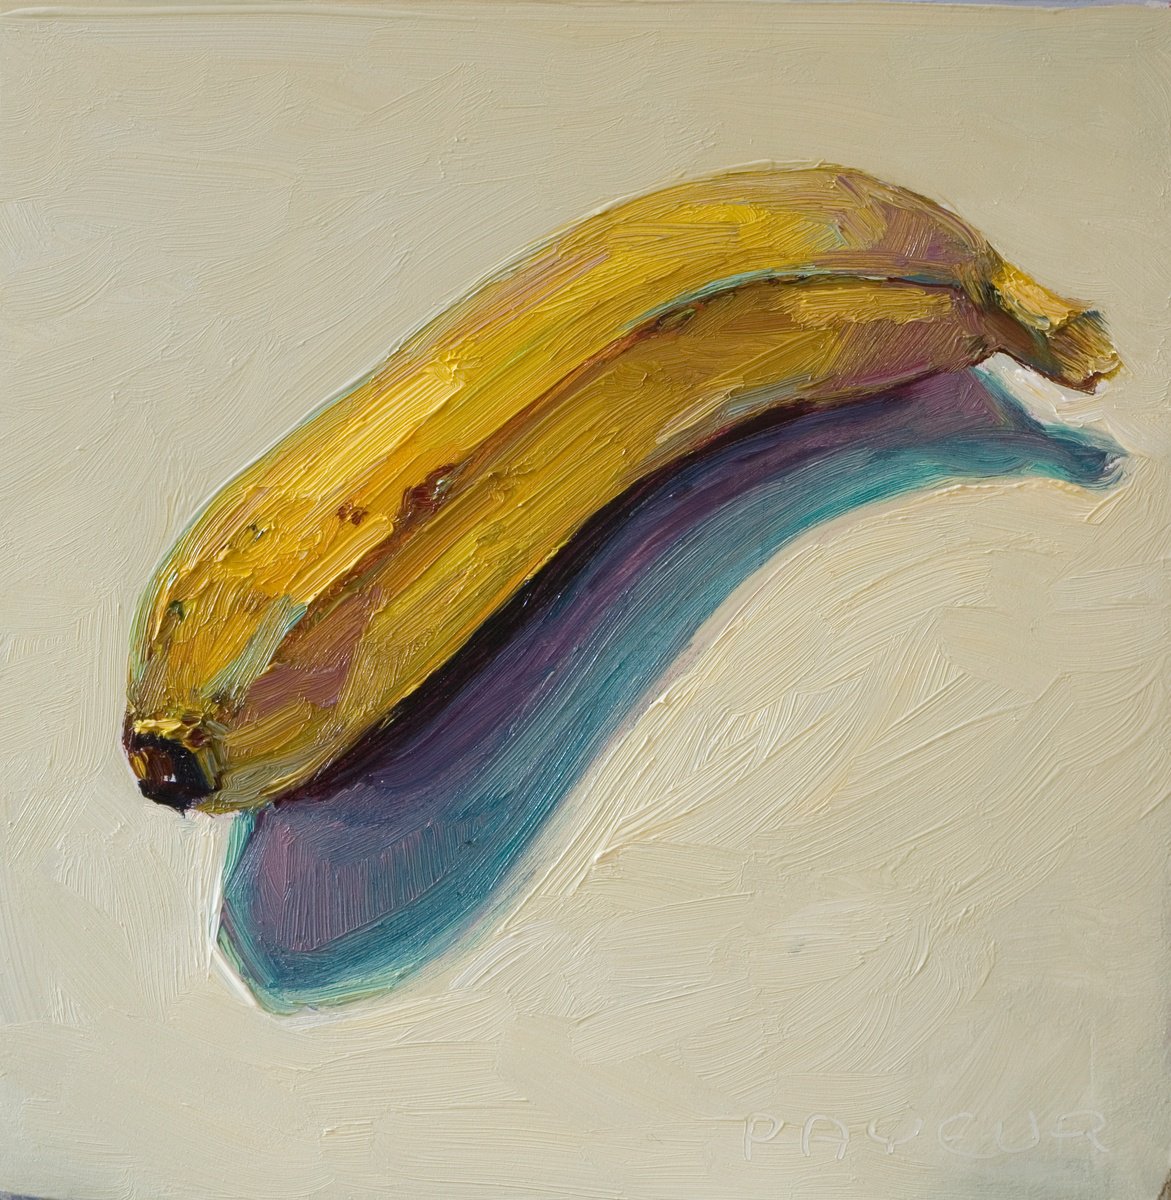 rough banana on white background by Olivier Payeur